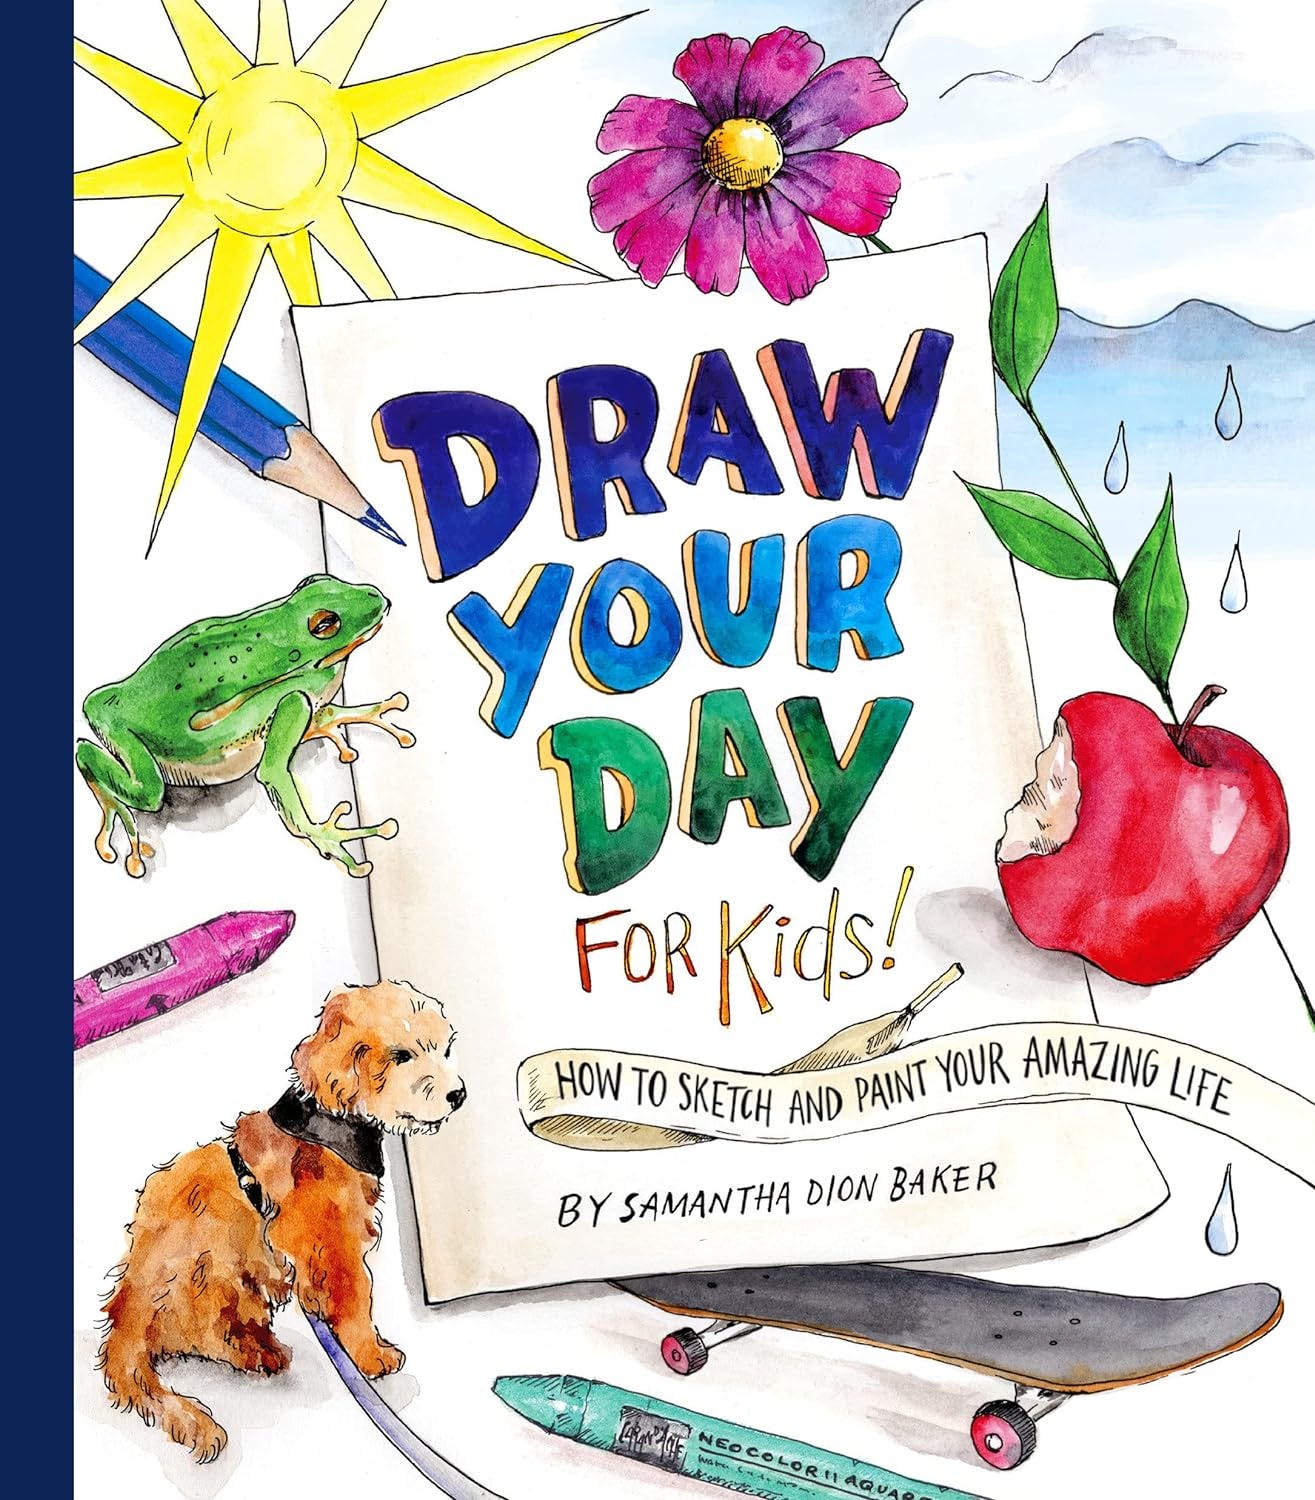 Draw Your Day for Kids cover by Samantha Dion Baker